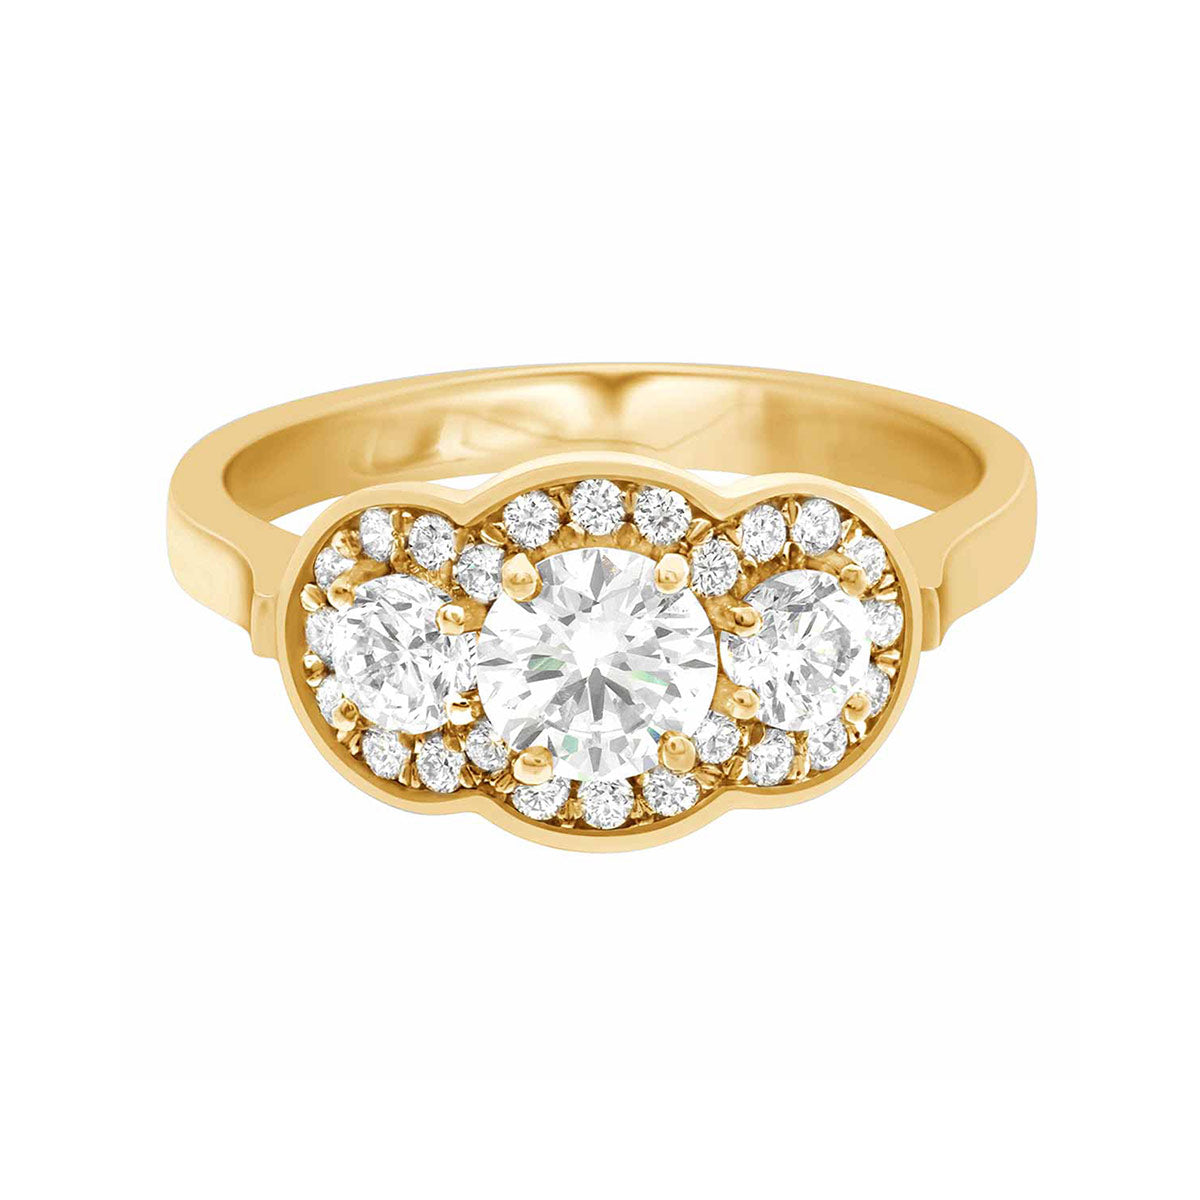 Three Halo Engagement Ring in yellow gold, lying flat with a white background